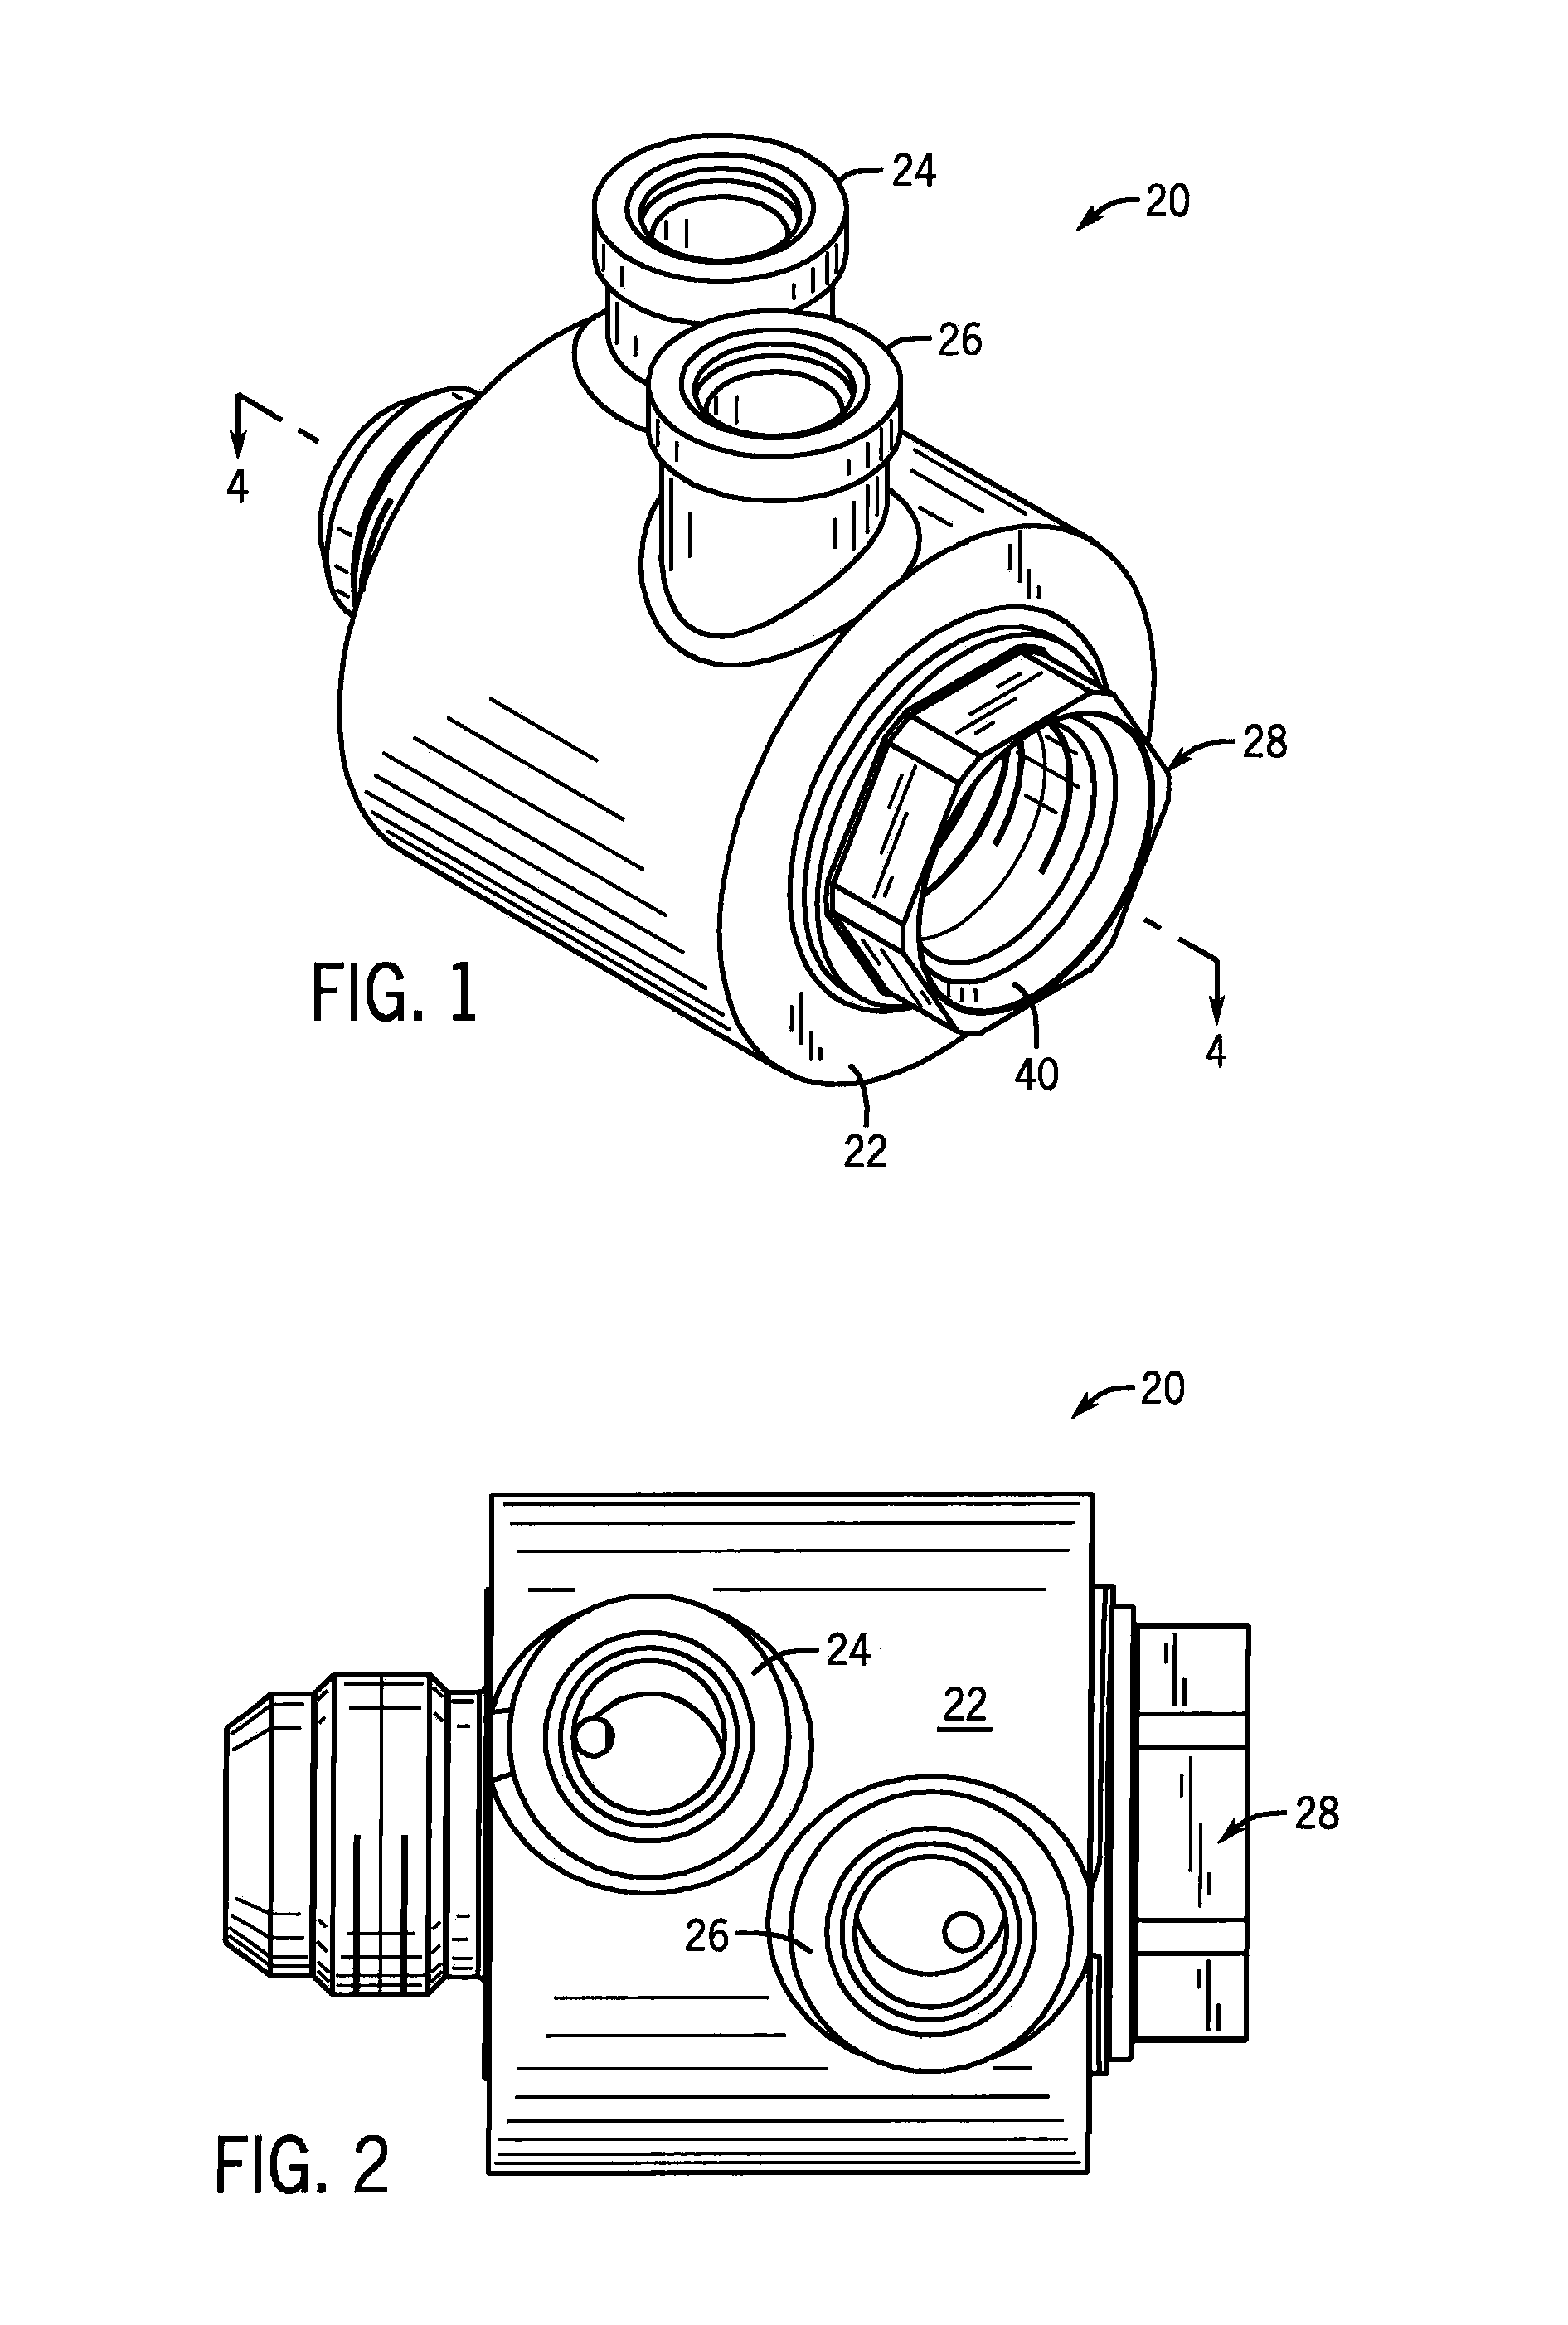 Valve with swirling coolant